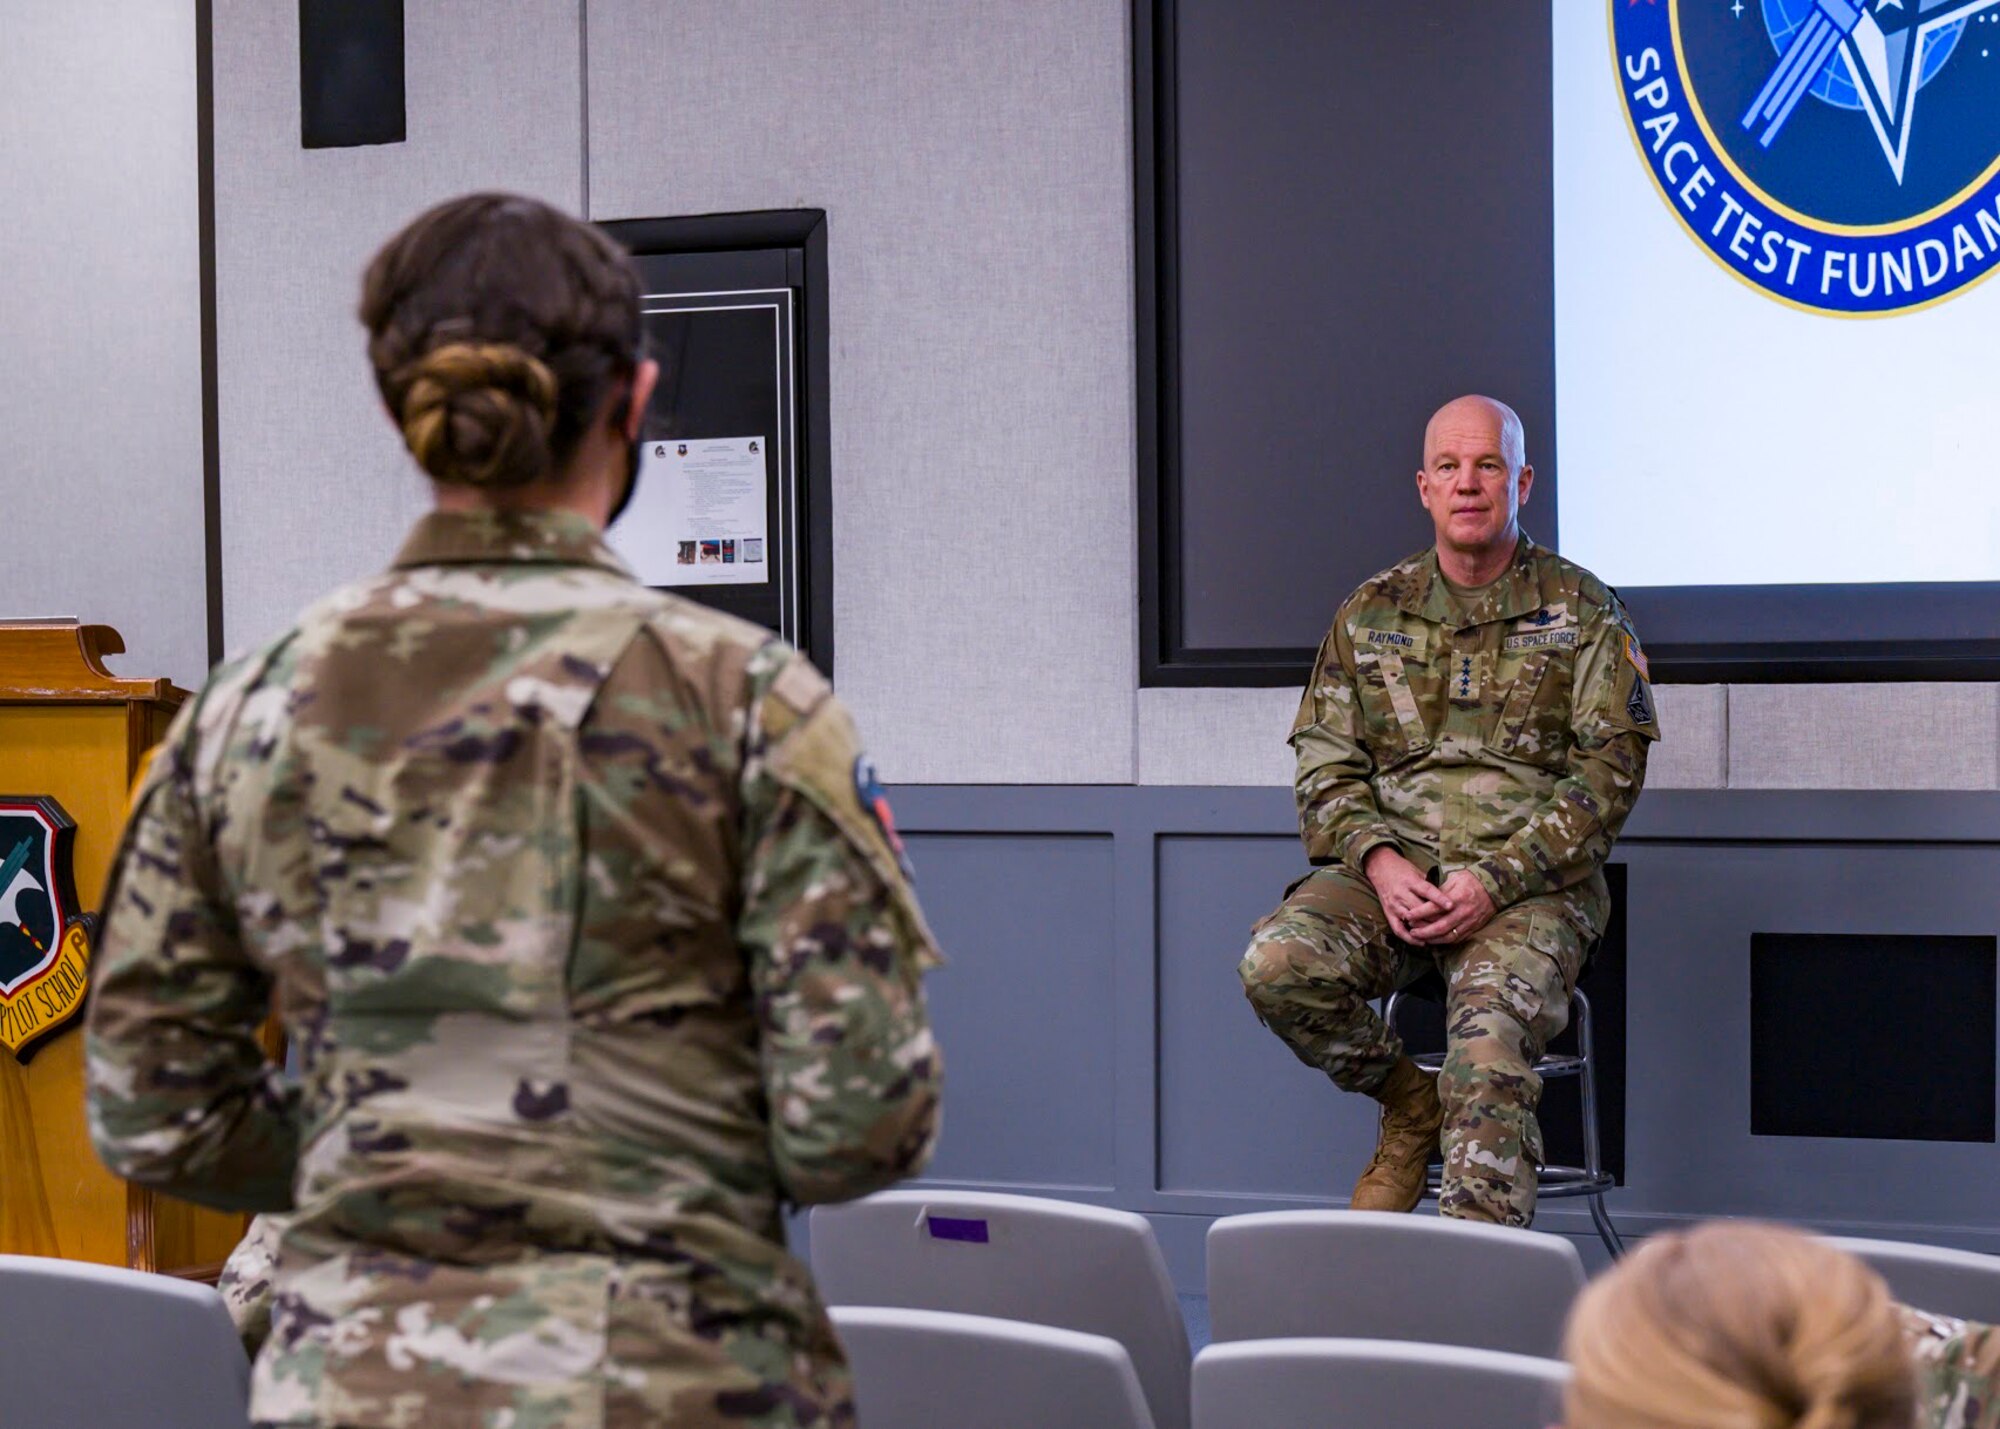 United States Space Force Gen. John W. “Jay” Raymond, Chief of Space Operations, responds to a question from Spc. 4 Haley Roll, Space Test Fundamentals Class 21-1 student, at Edwards Air Force Base, California, April 6. (Air Force photo by Giancarlo Casem)